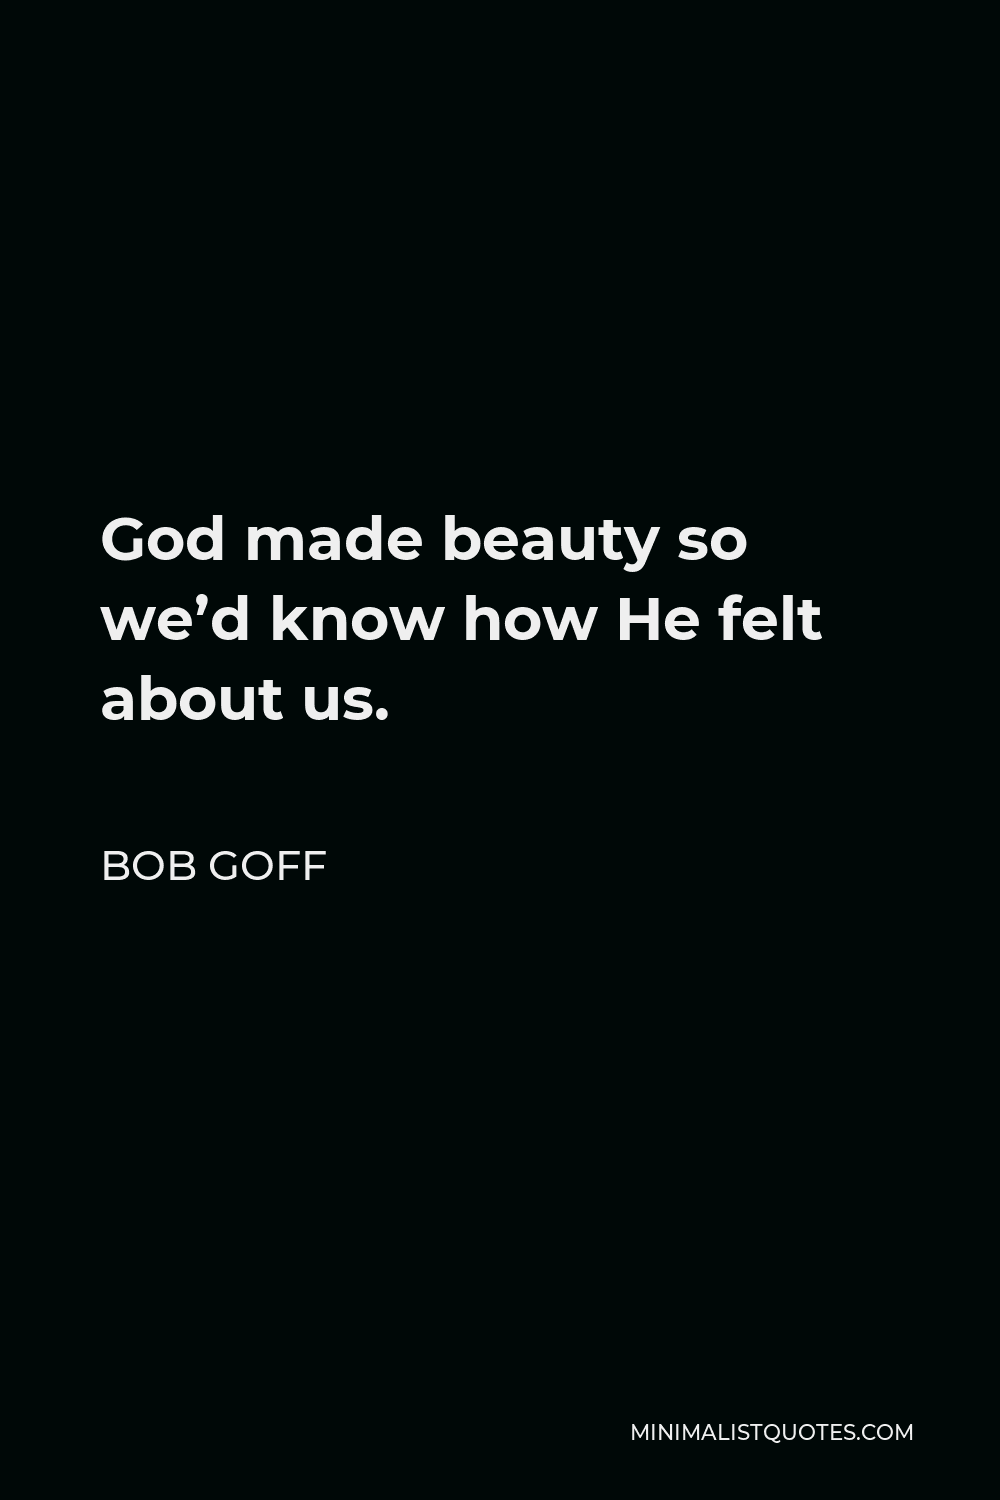 Bob Goff Quote - God made beauty so we’d know how He felt about us.